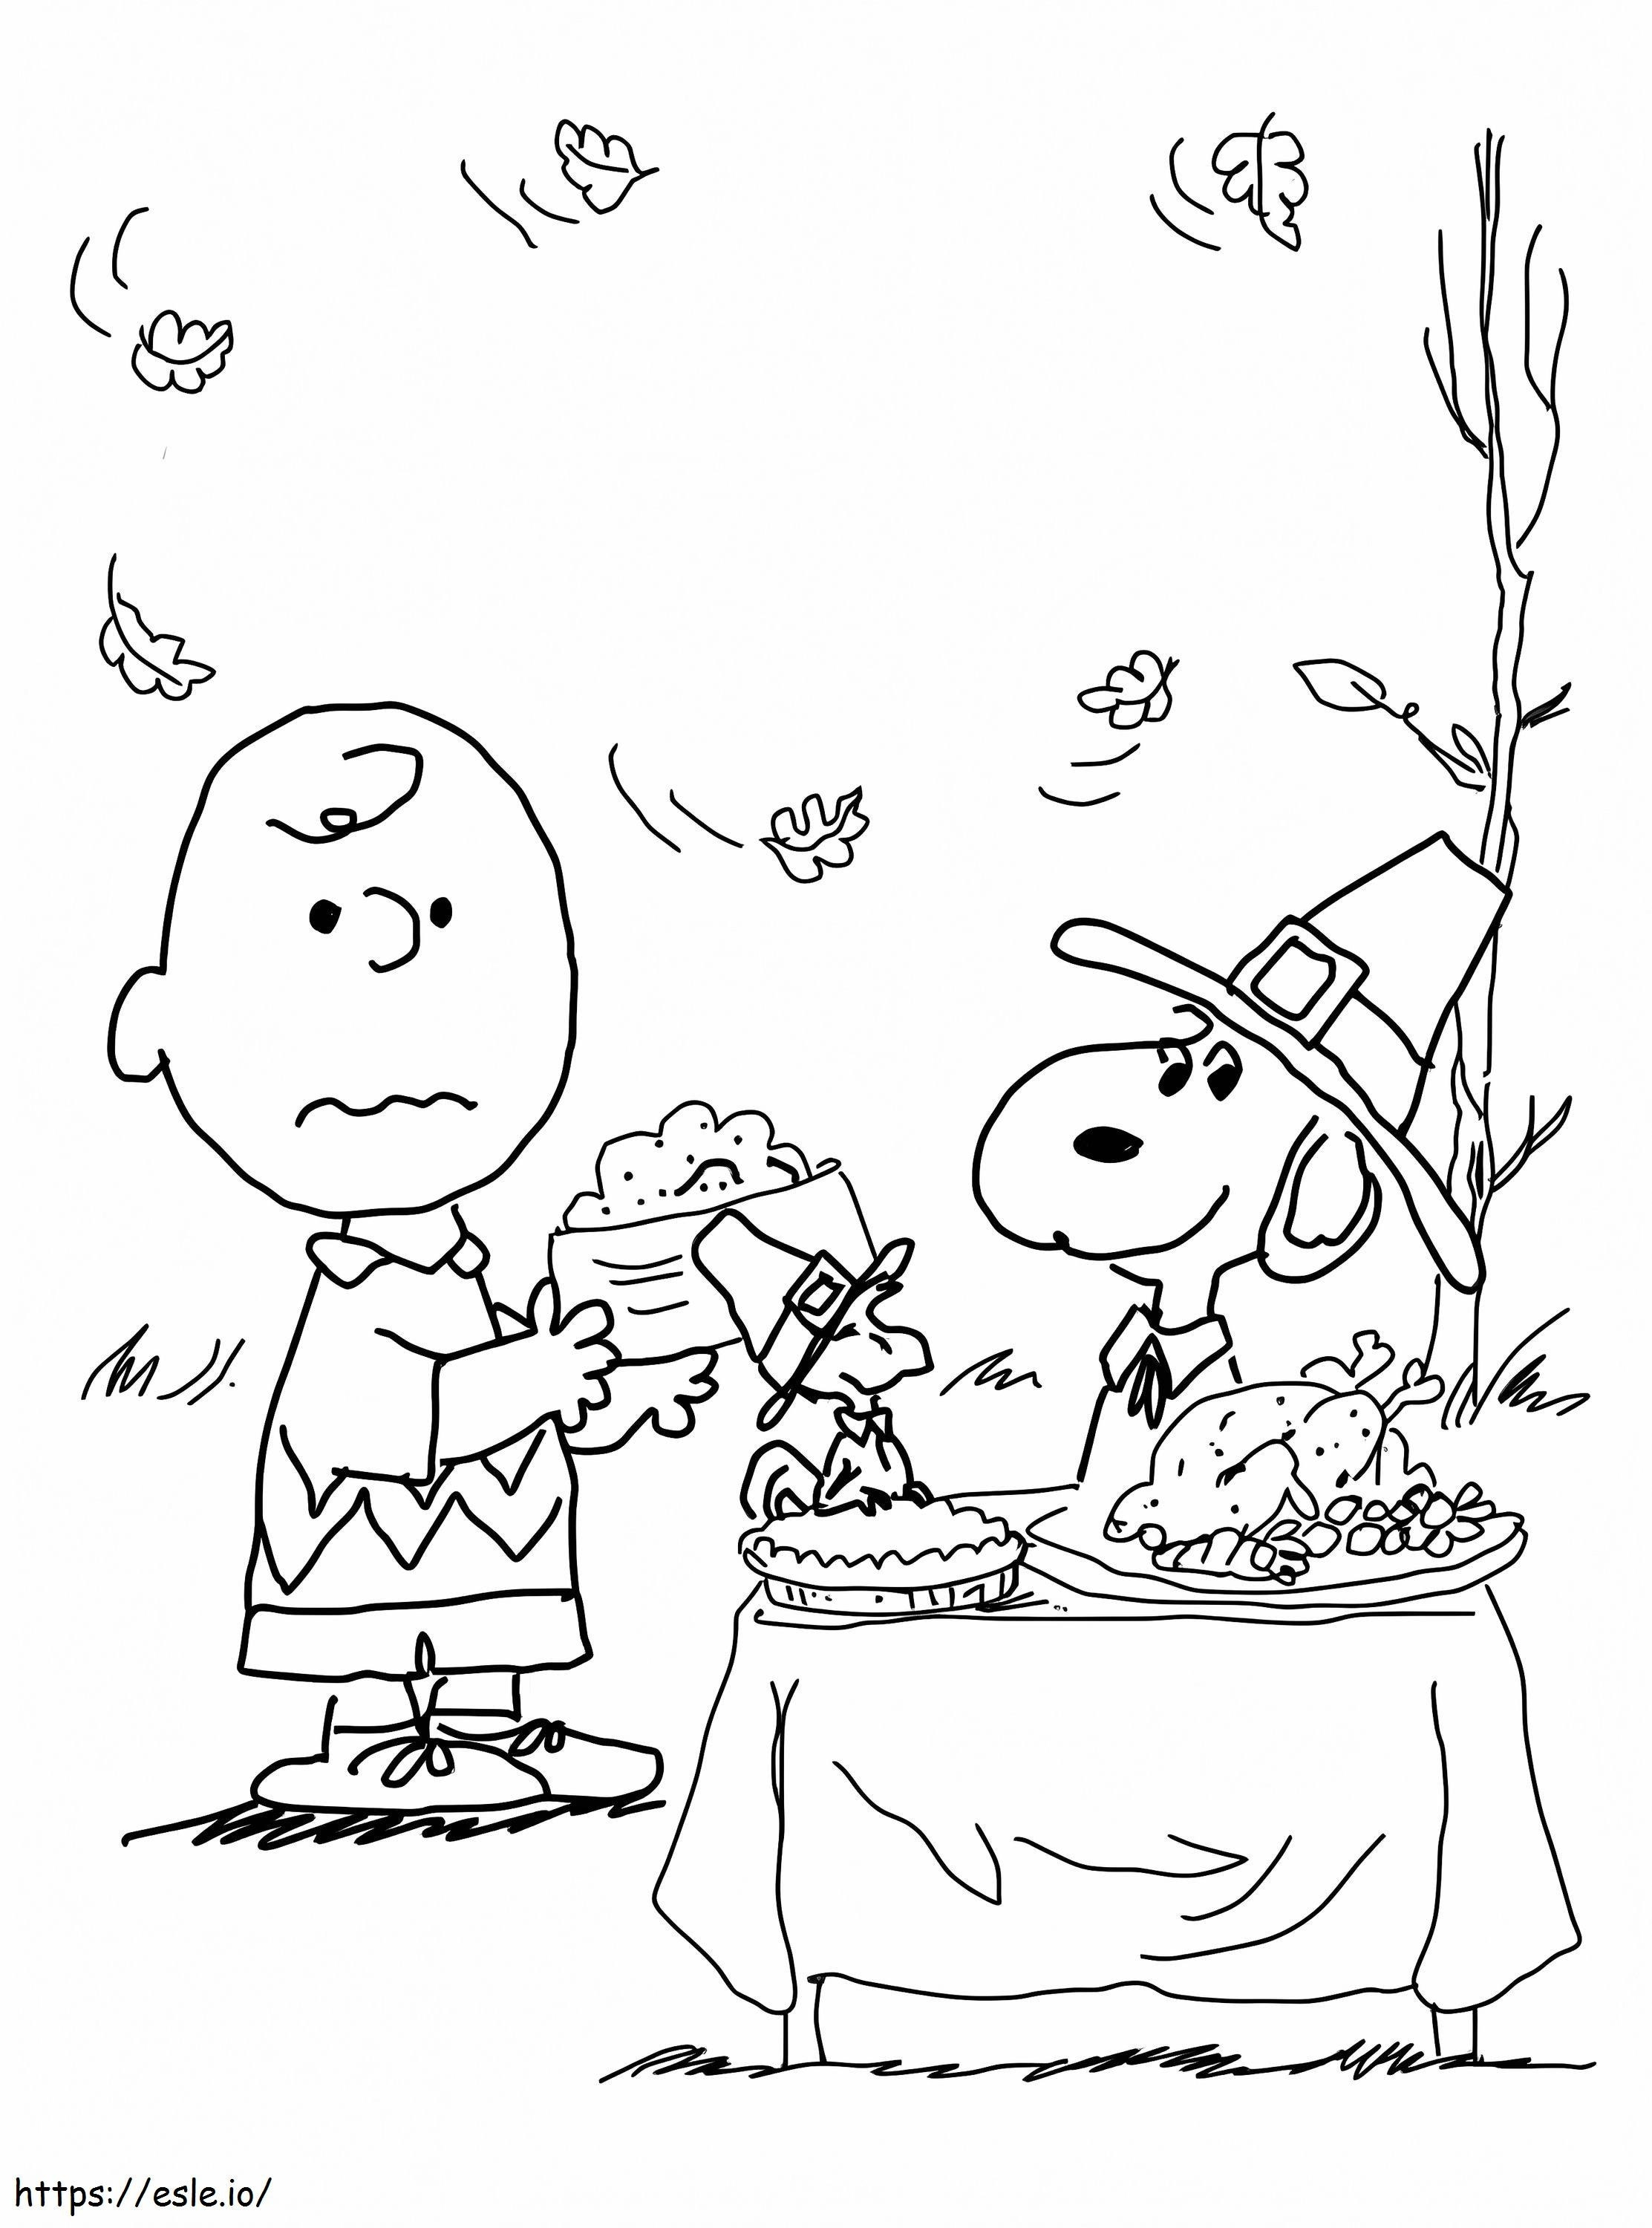 Charlie Brown Thanksgiving coloring page